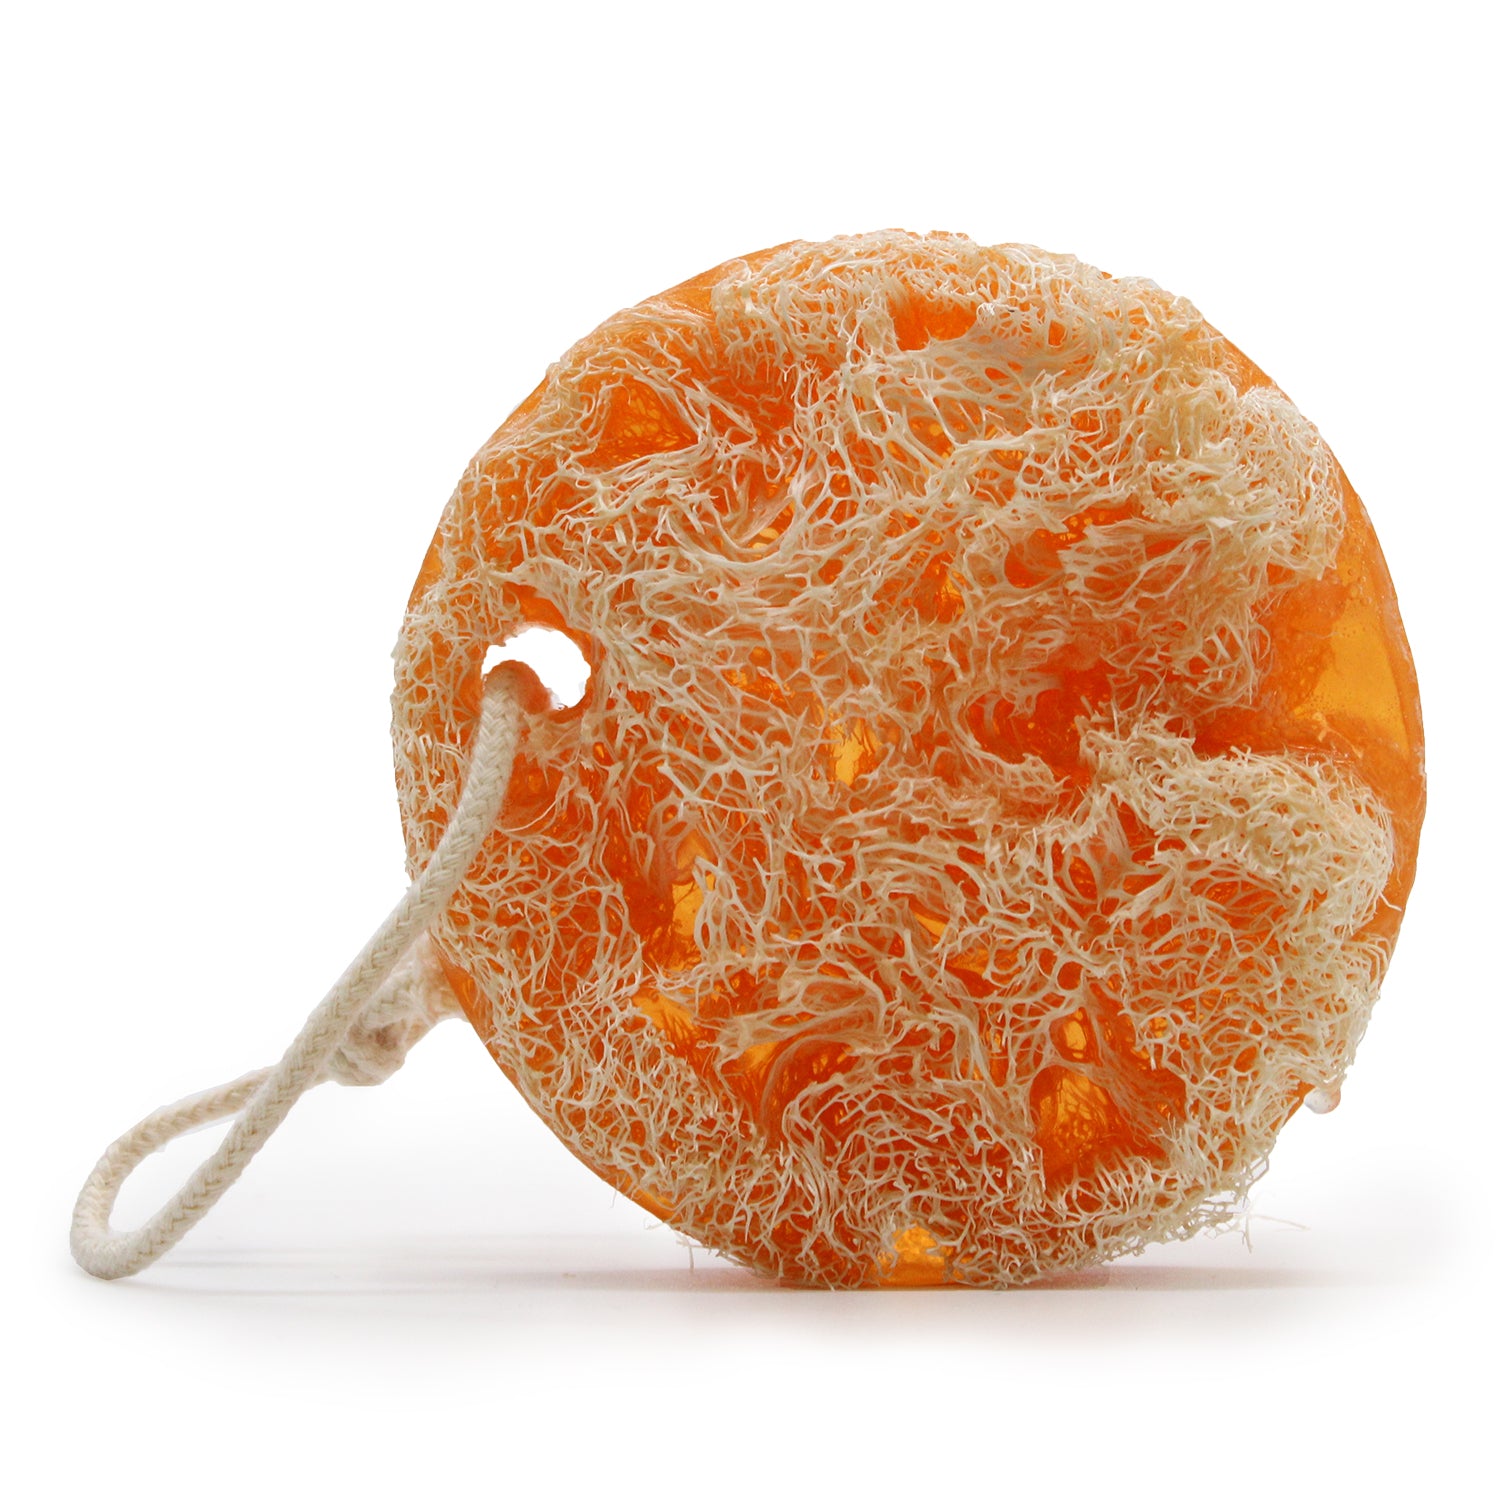 Fruity Scrub Soap on a Rope - LB Boutique